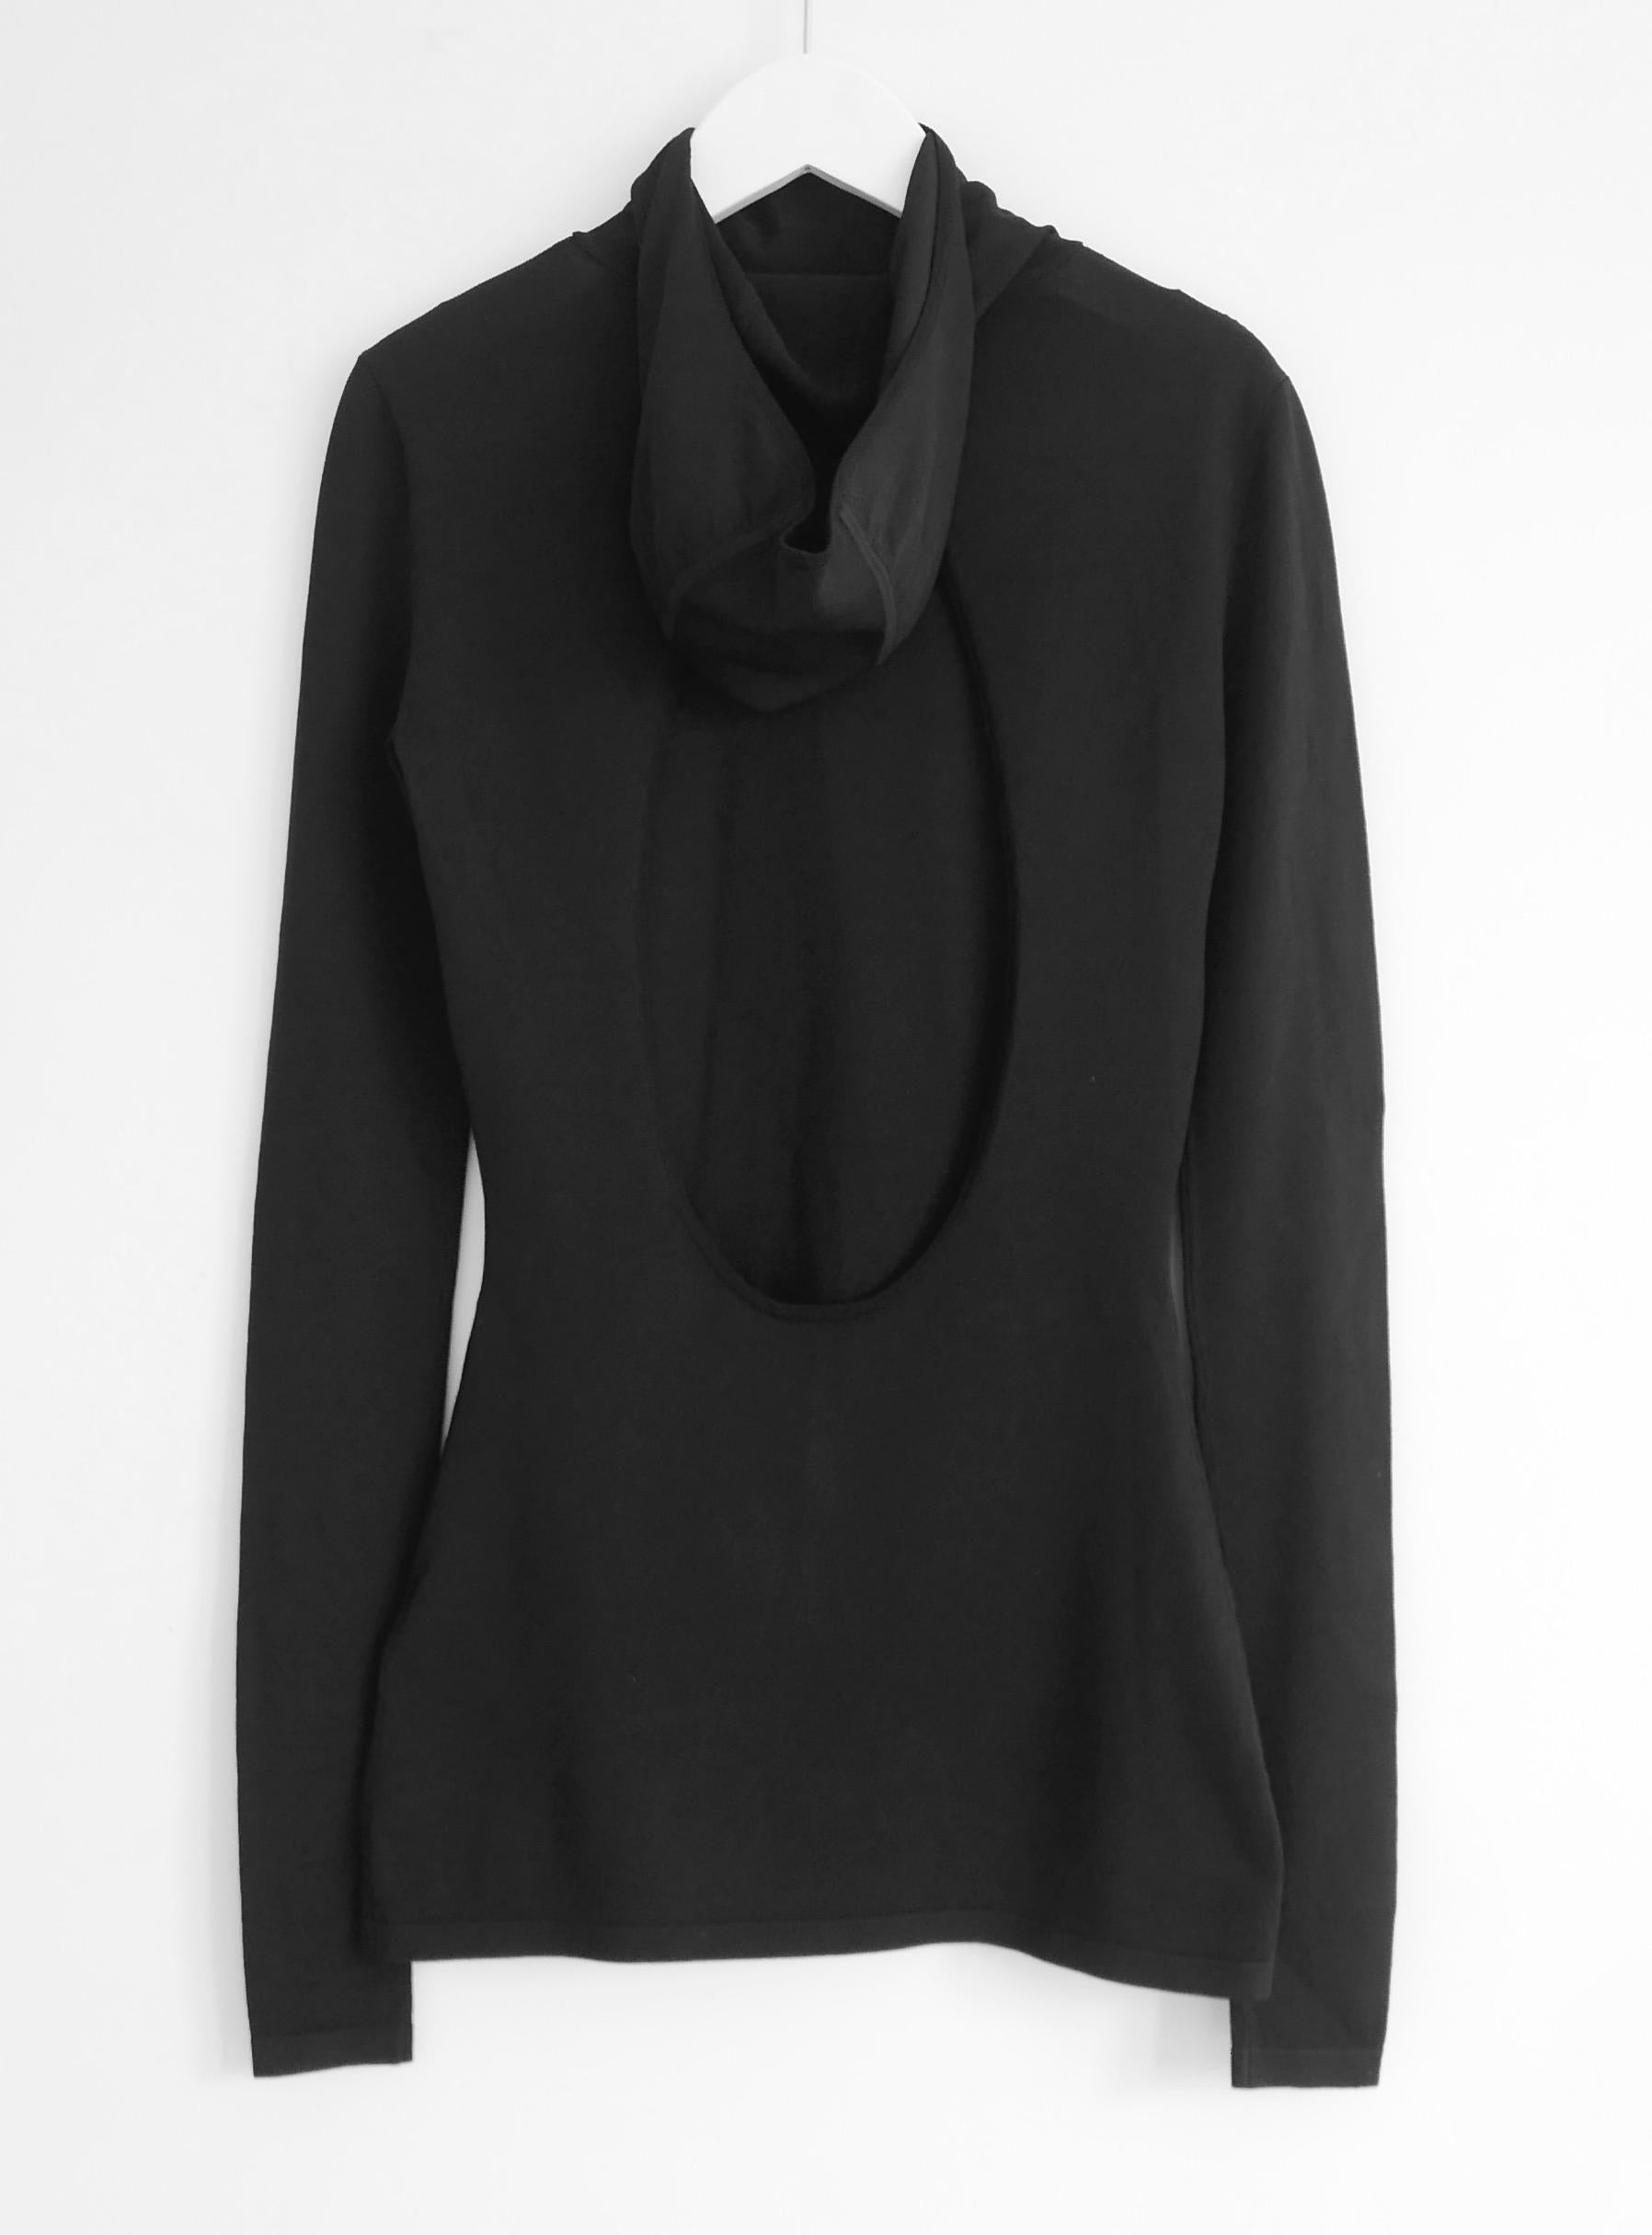  Dion Lee Pinnacle Balaclava Hooded Knit Top In Excellent Condition For Sale In London, GB